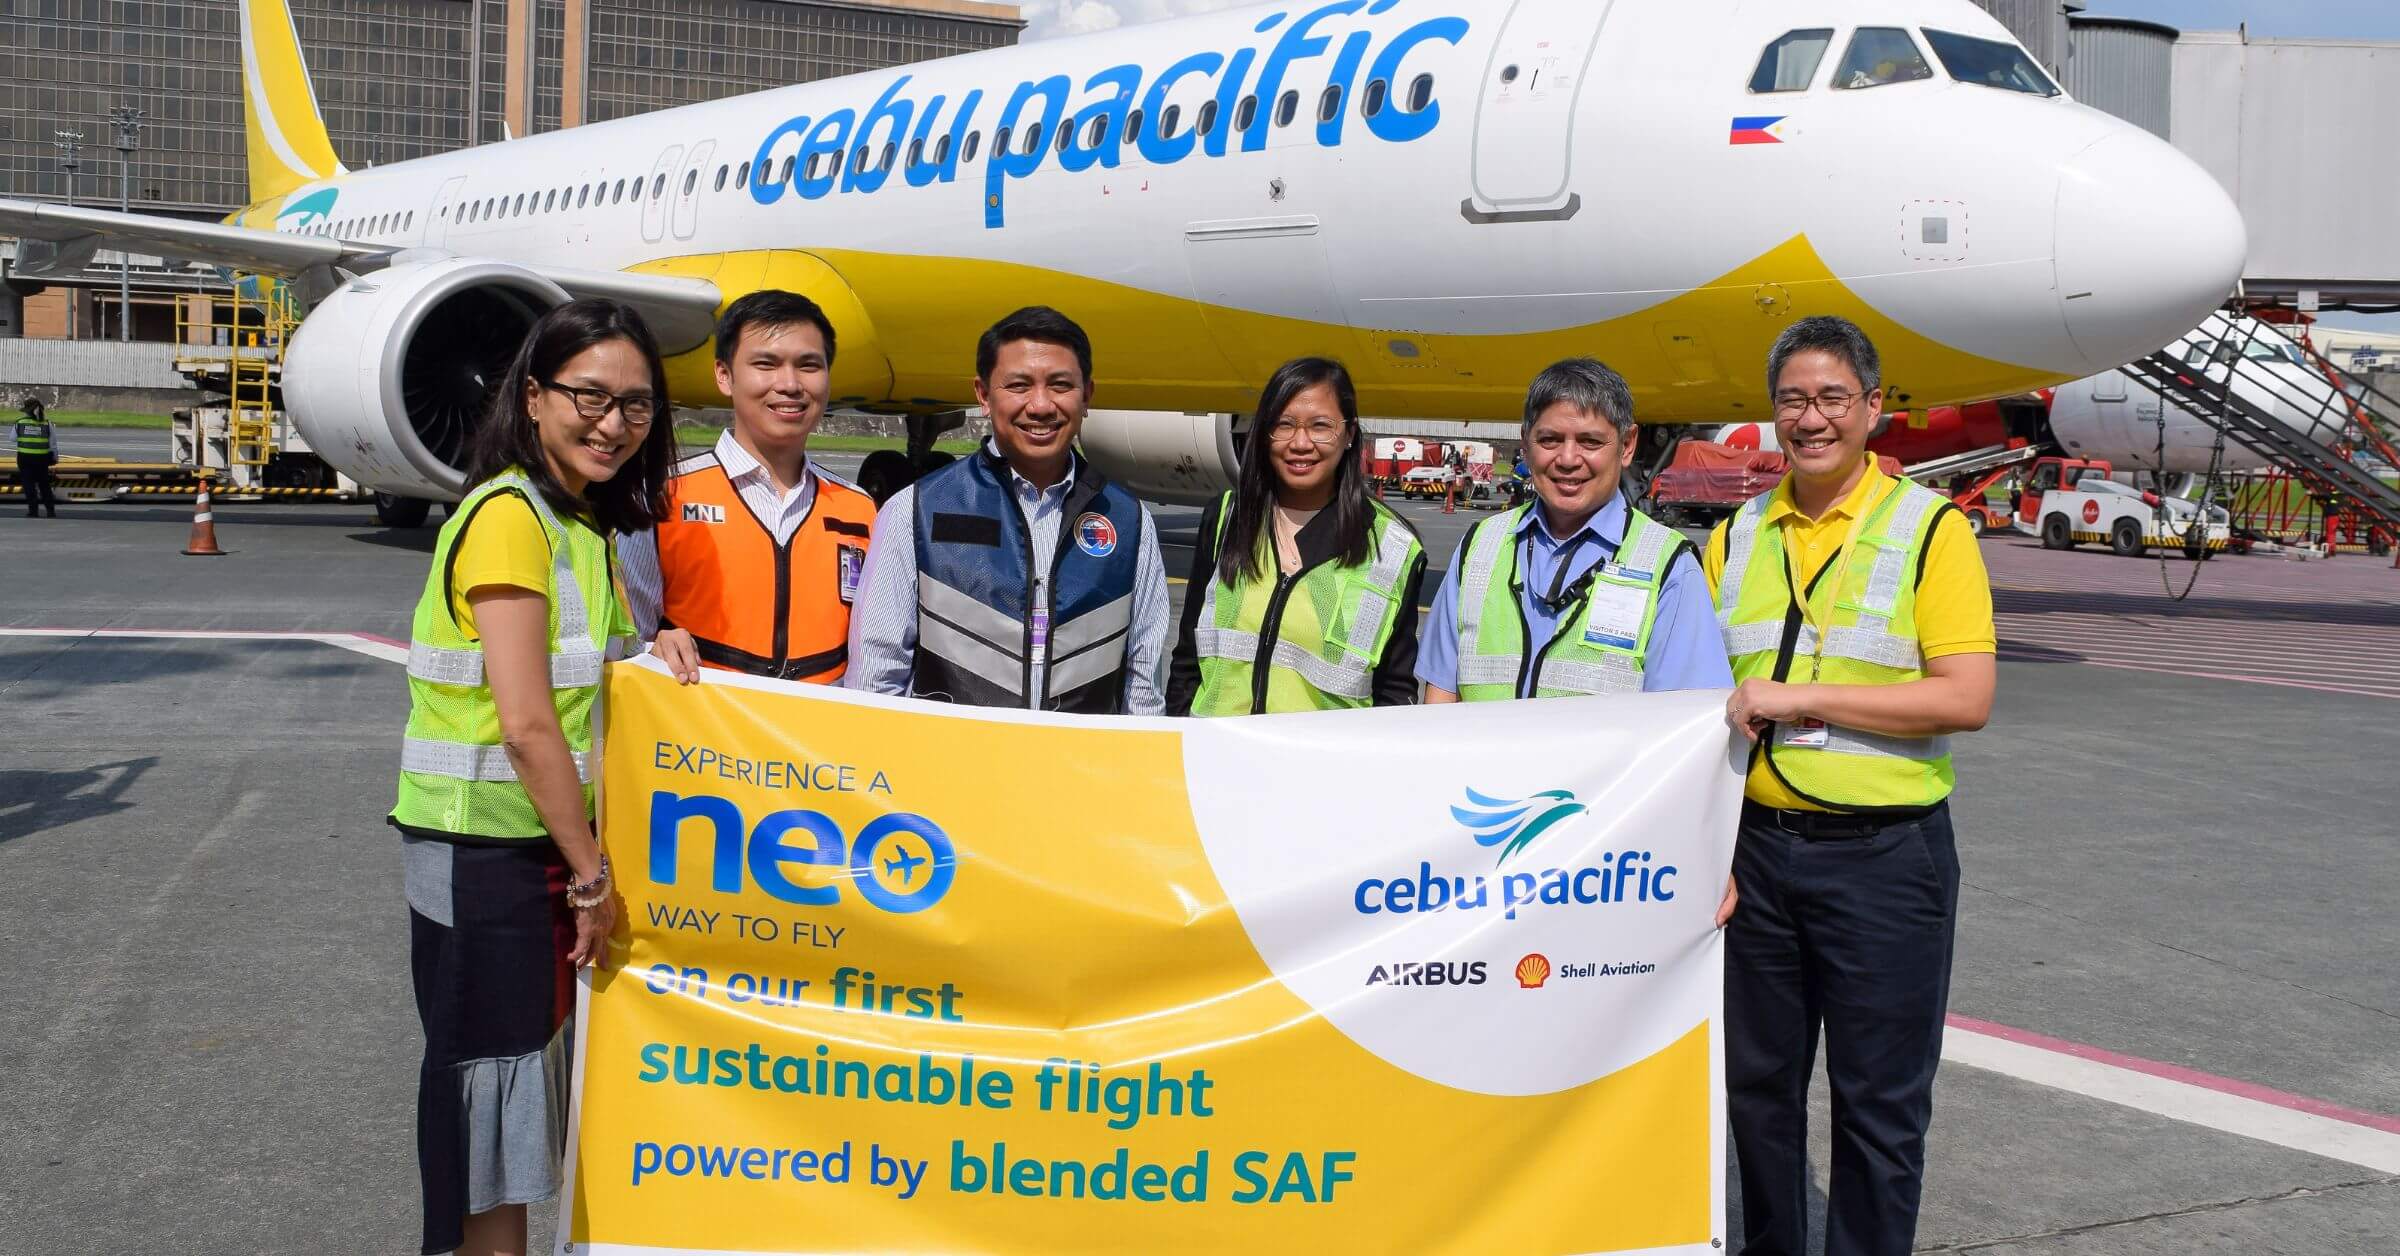 Cebu Pacific operates its first SAF-powered commercial flight